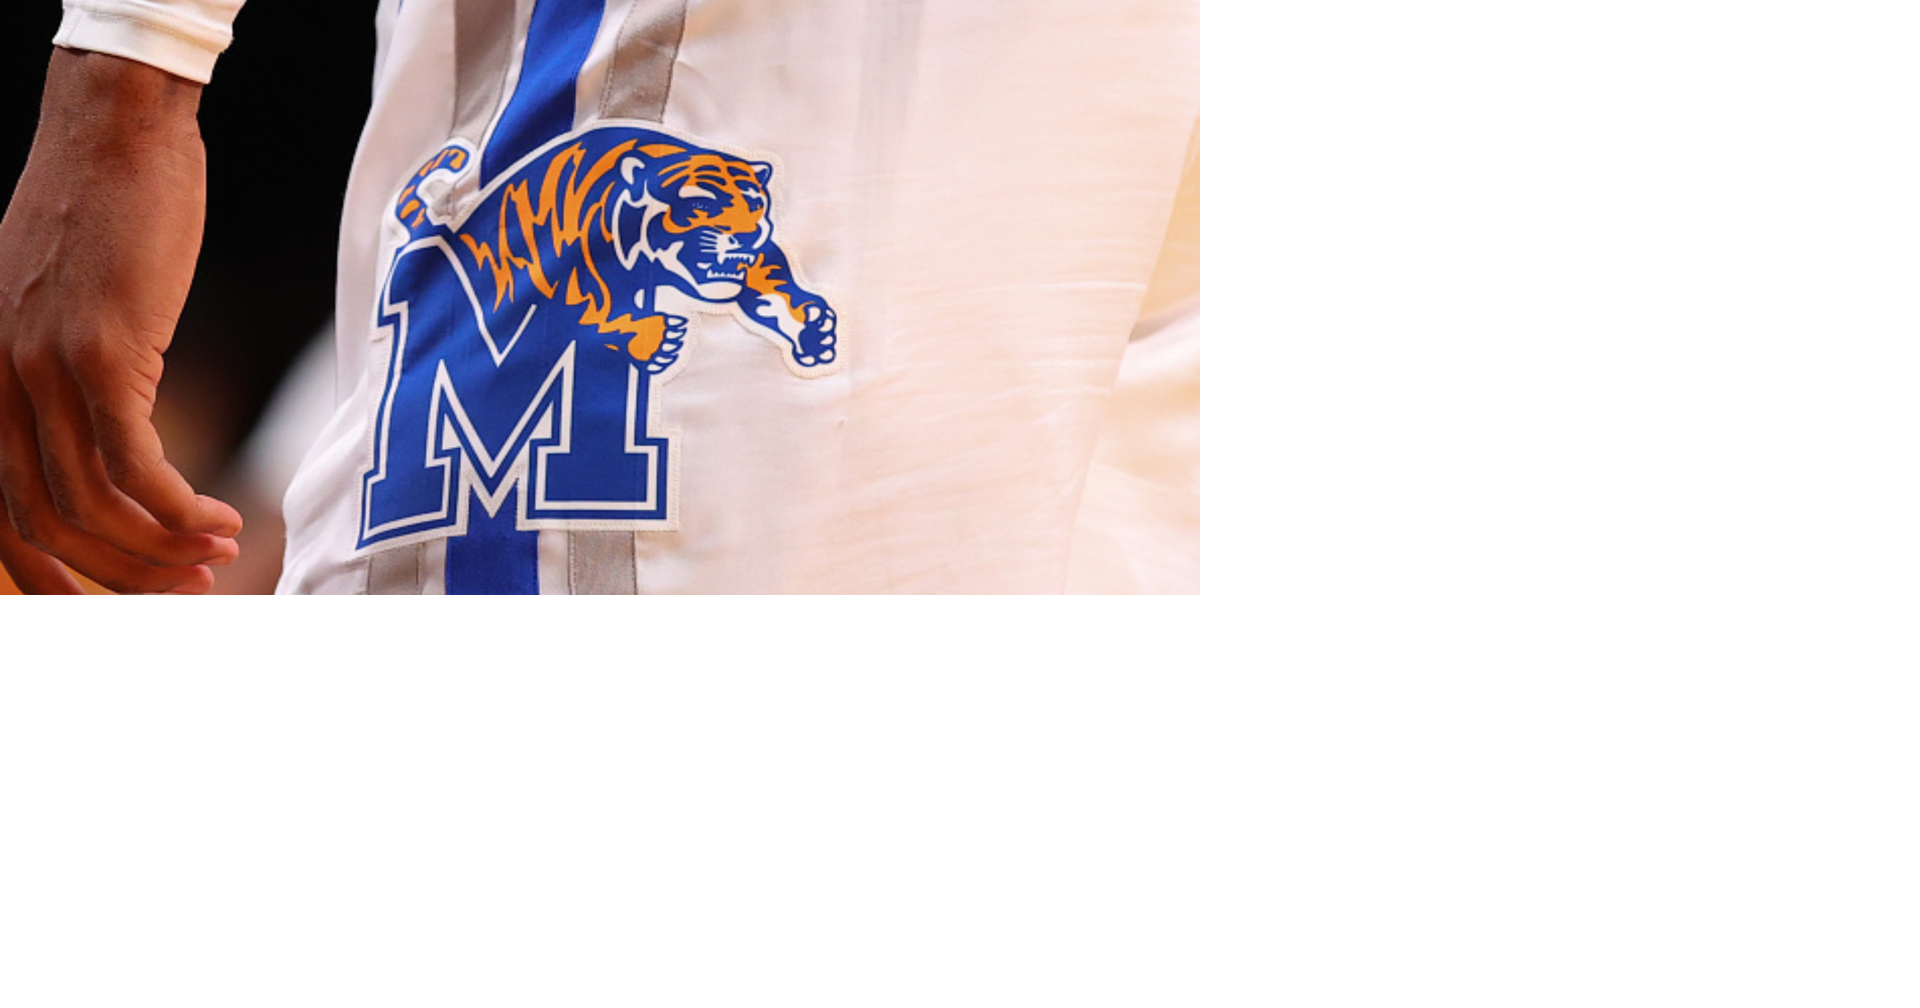 Memphis Tigers jump to No. 10 in AP Top 25